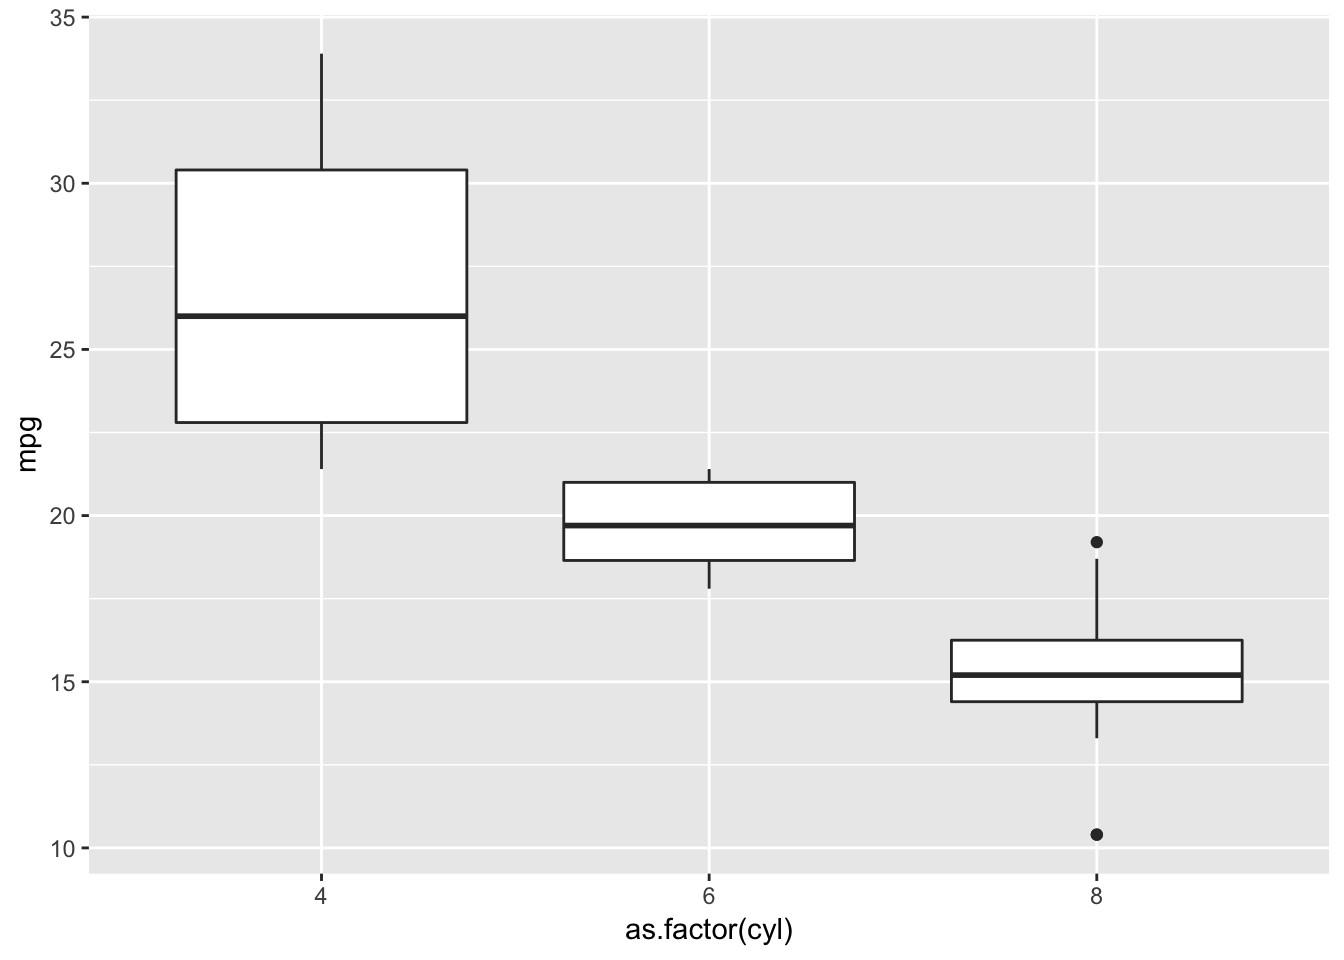 Boxplots kind of summarize the data and make the plot easier to understand our data